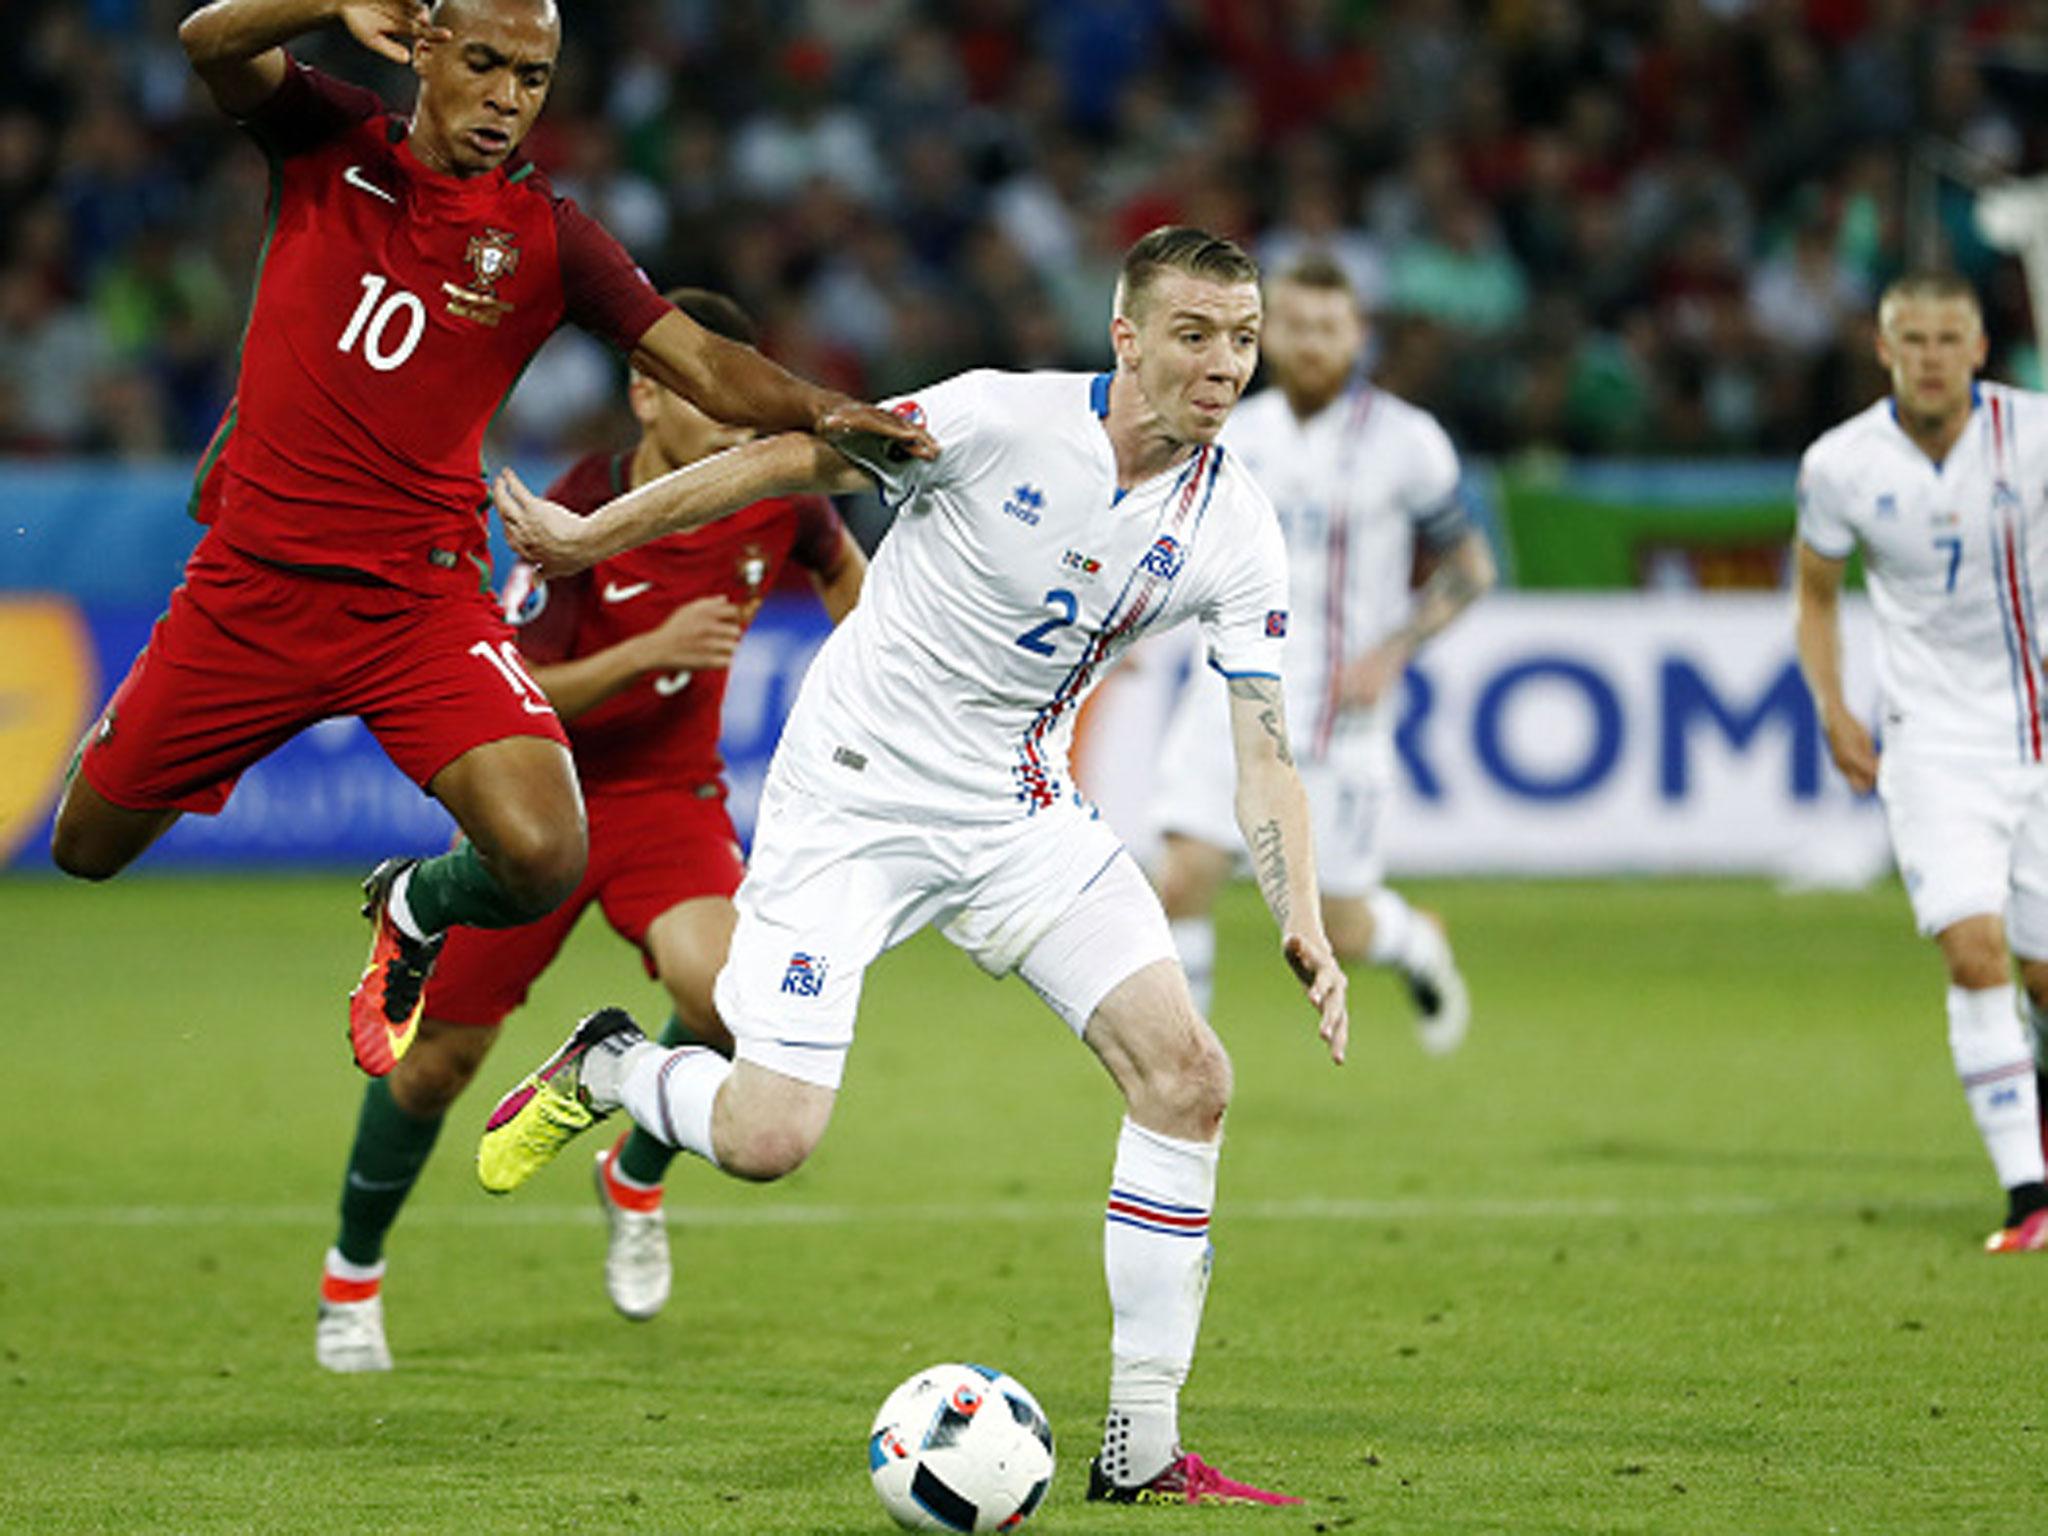 &#13;
Birkir Saevarsson played his part in keeping Portugal's forward line at bay (Getty)&#13;